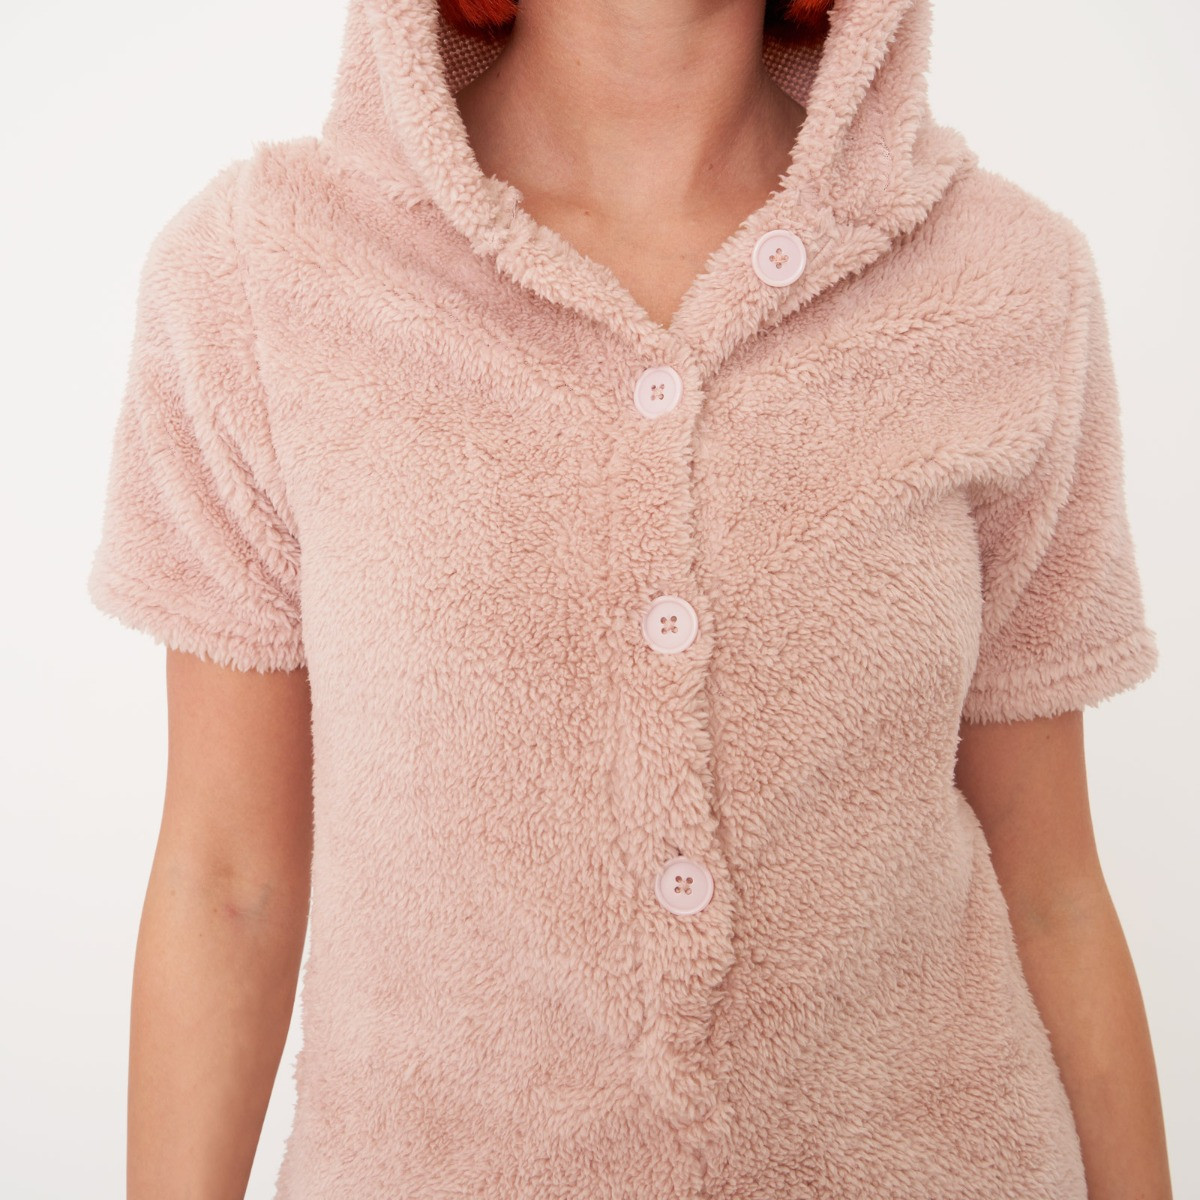 OHS Teddy Hooded Playsuit - Blush Pink>